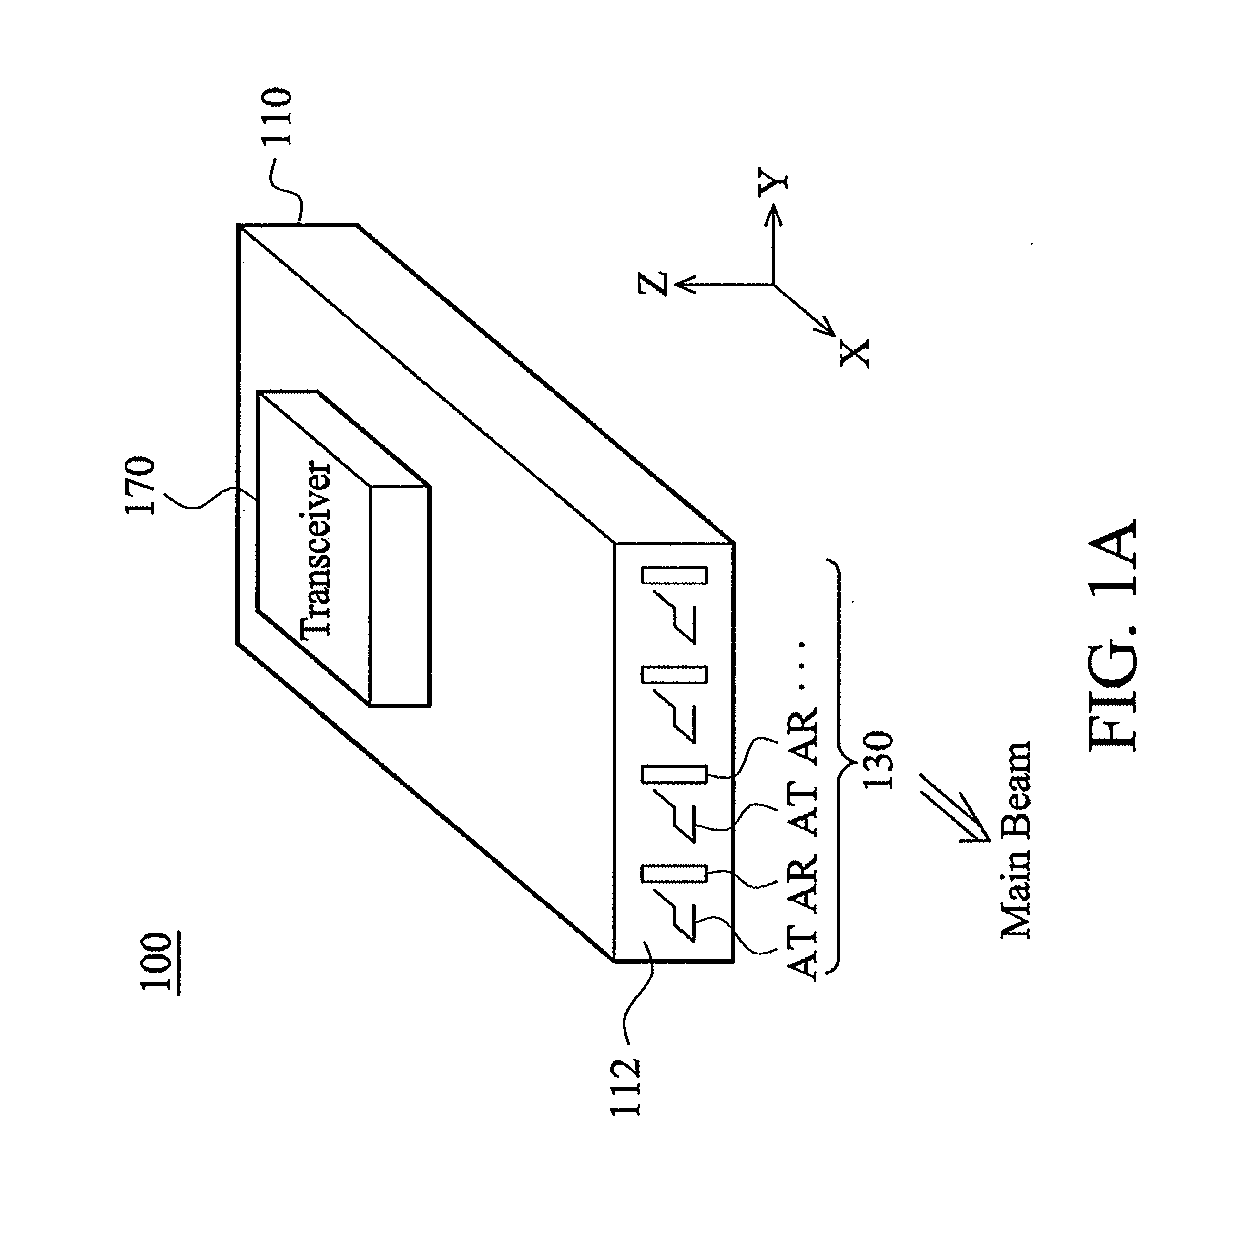 Mobile device and antenna array therein